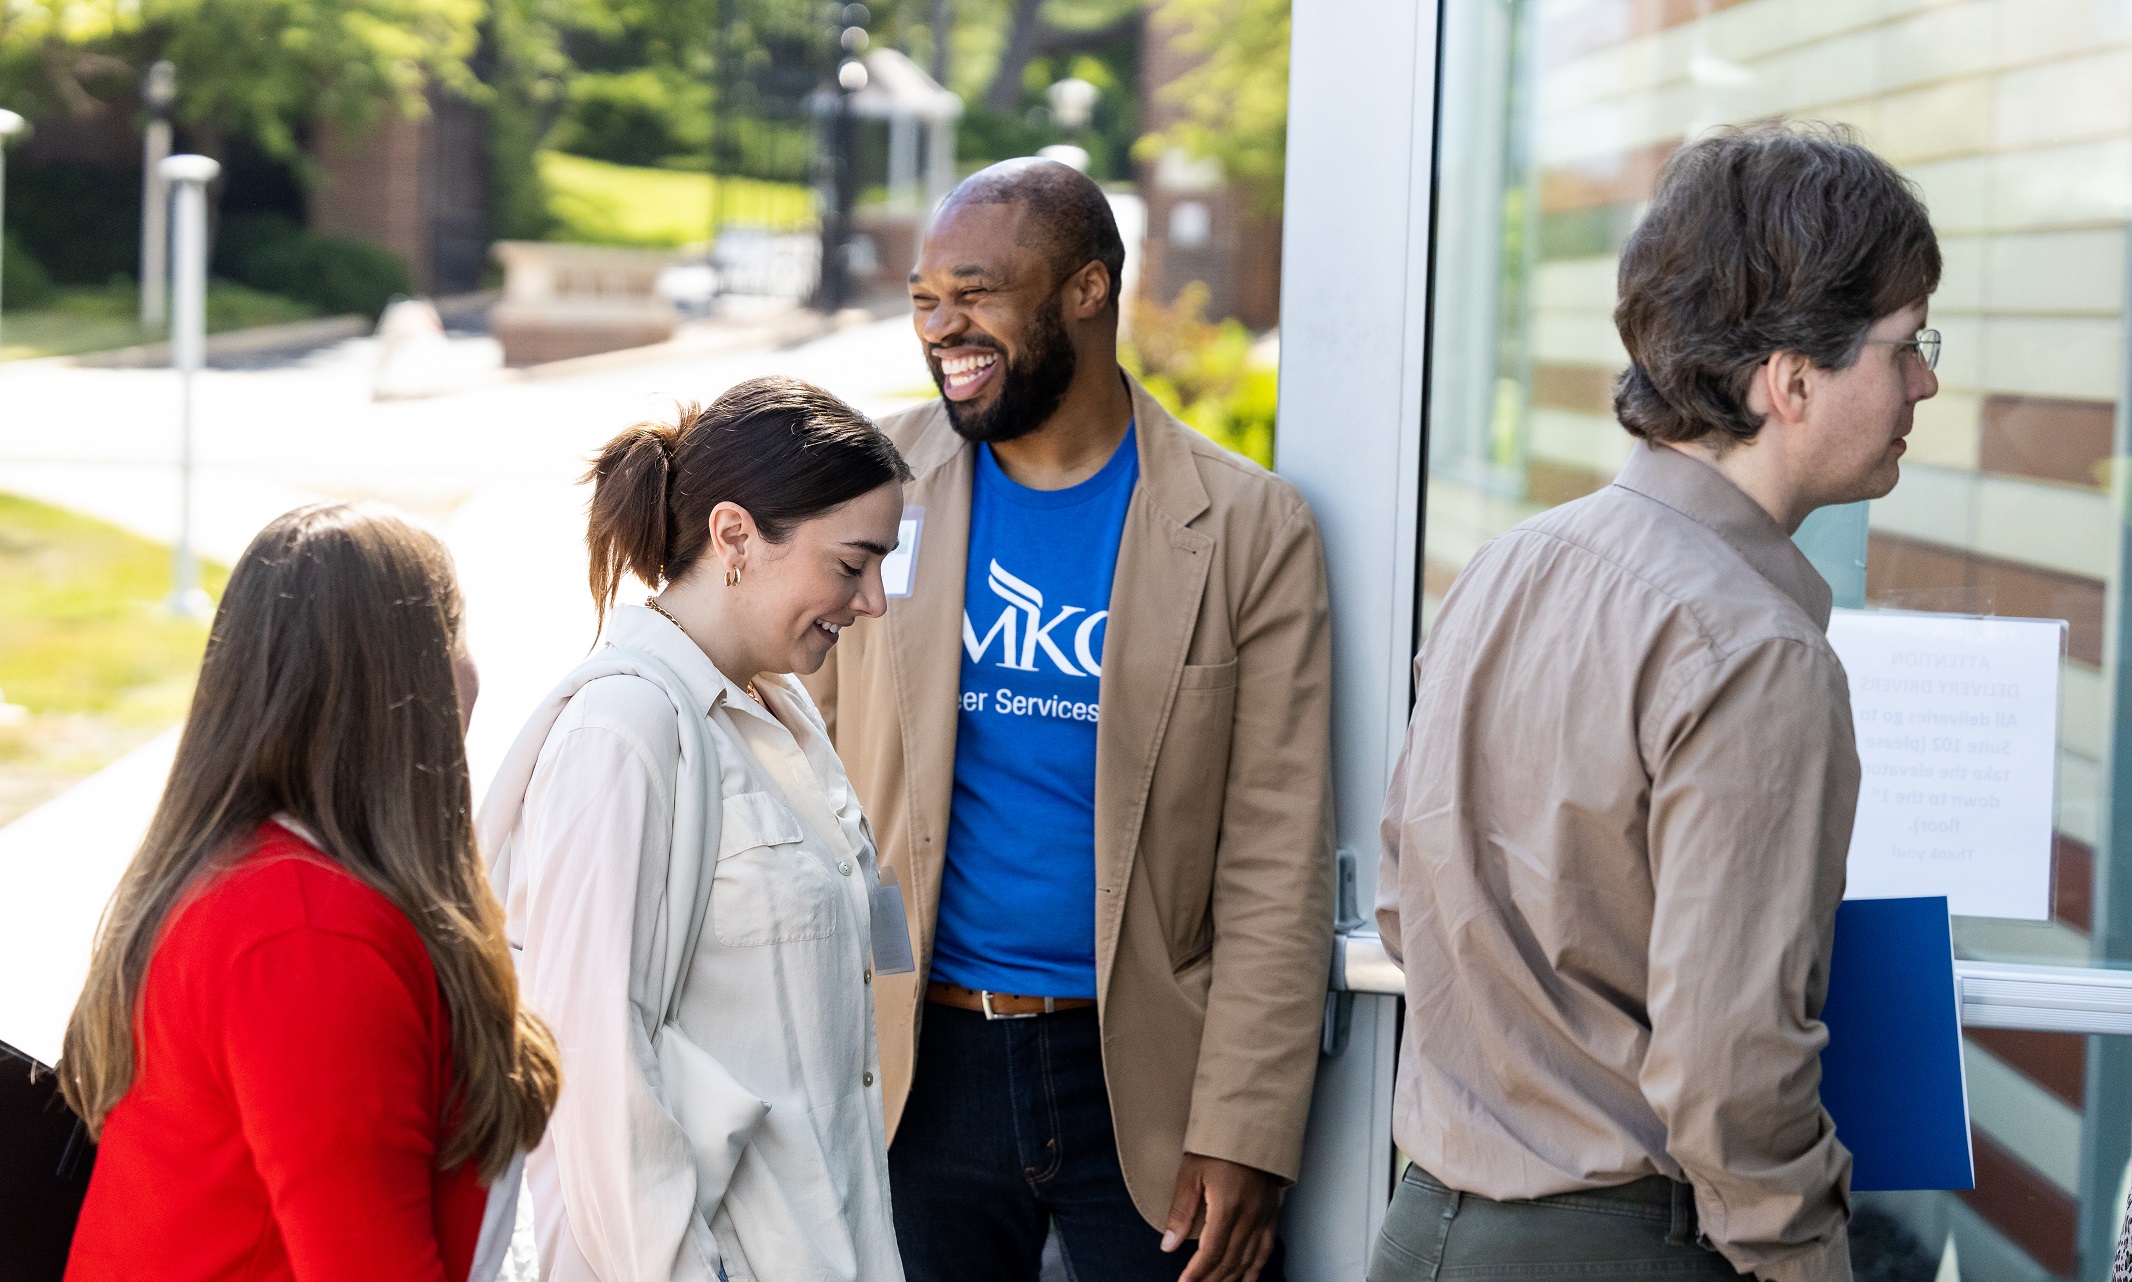 UMKC Career Services employee greets attendees outside of the Student Union